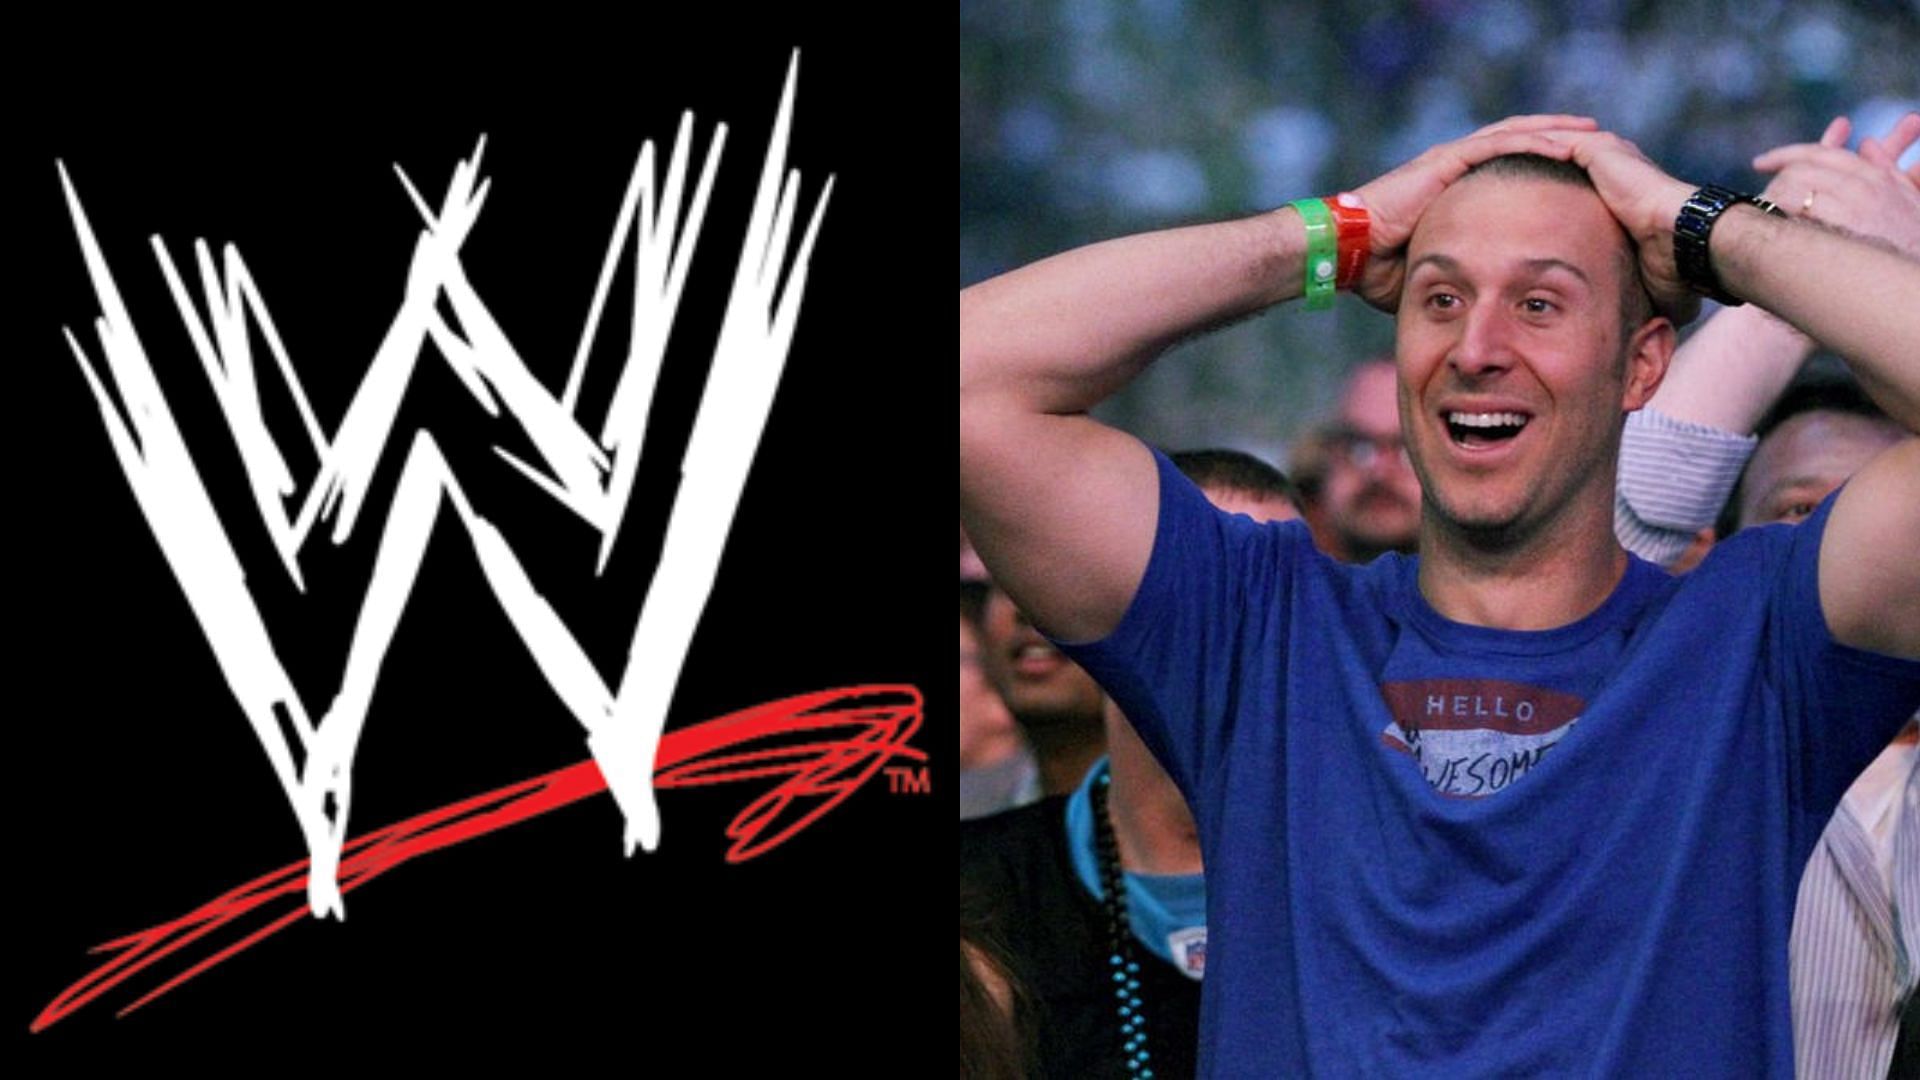 The star made a shocking appearance at WWE show this week